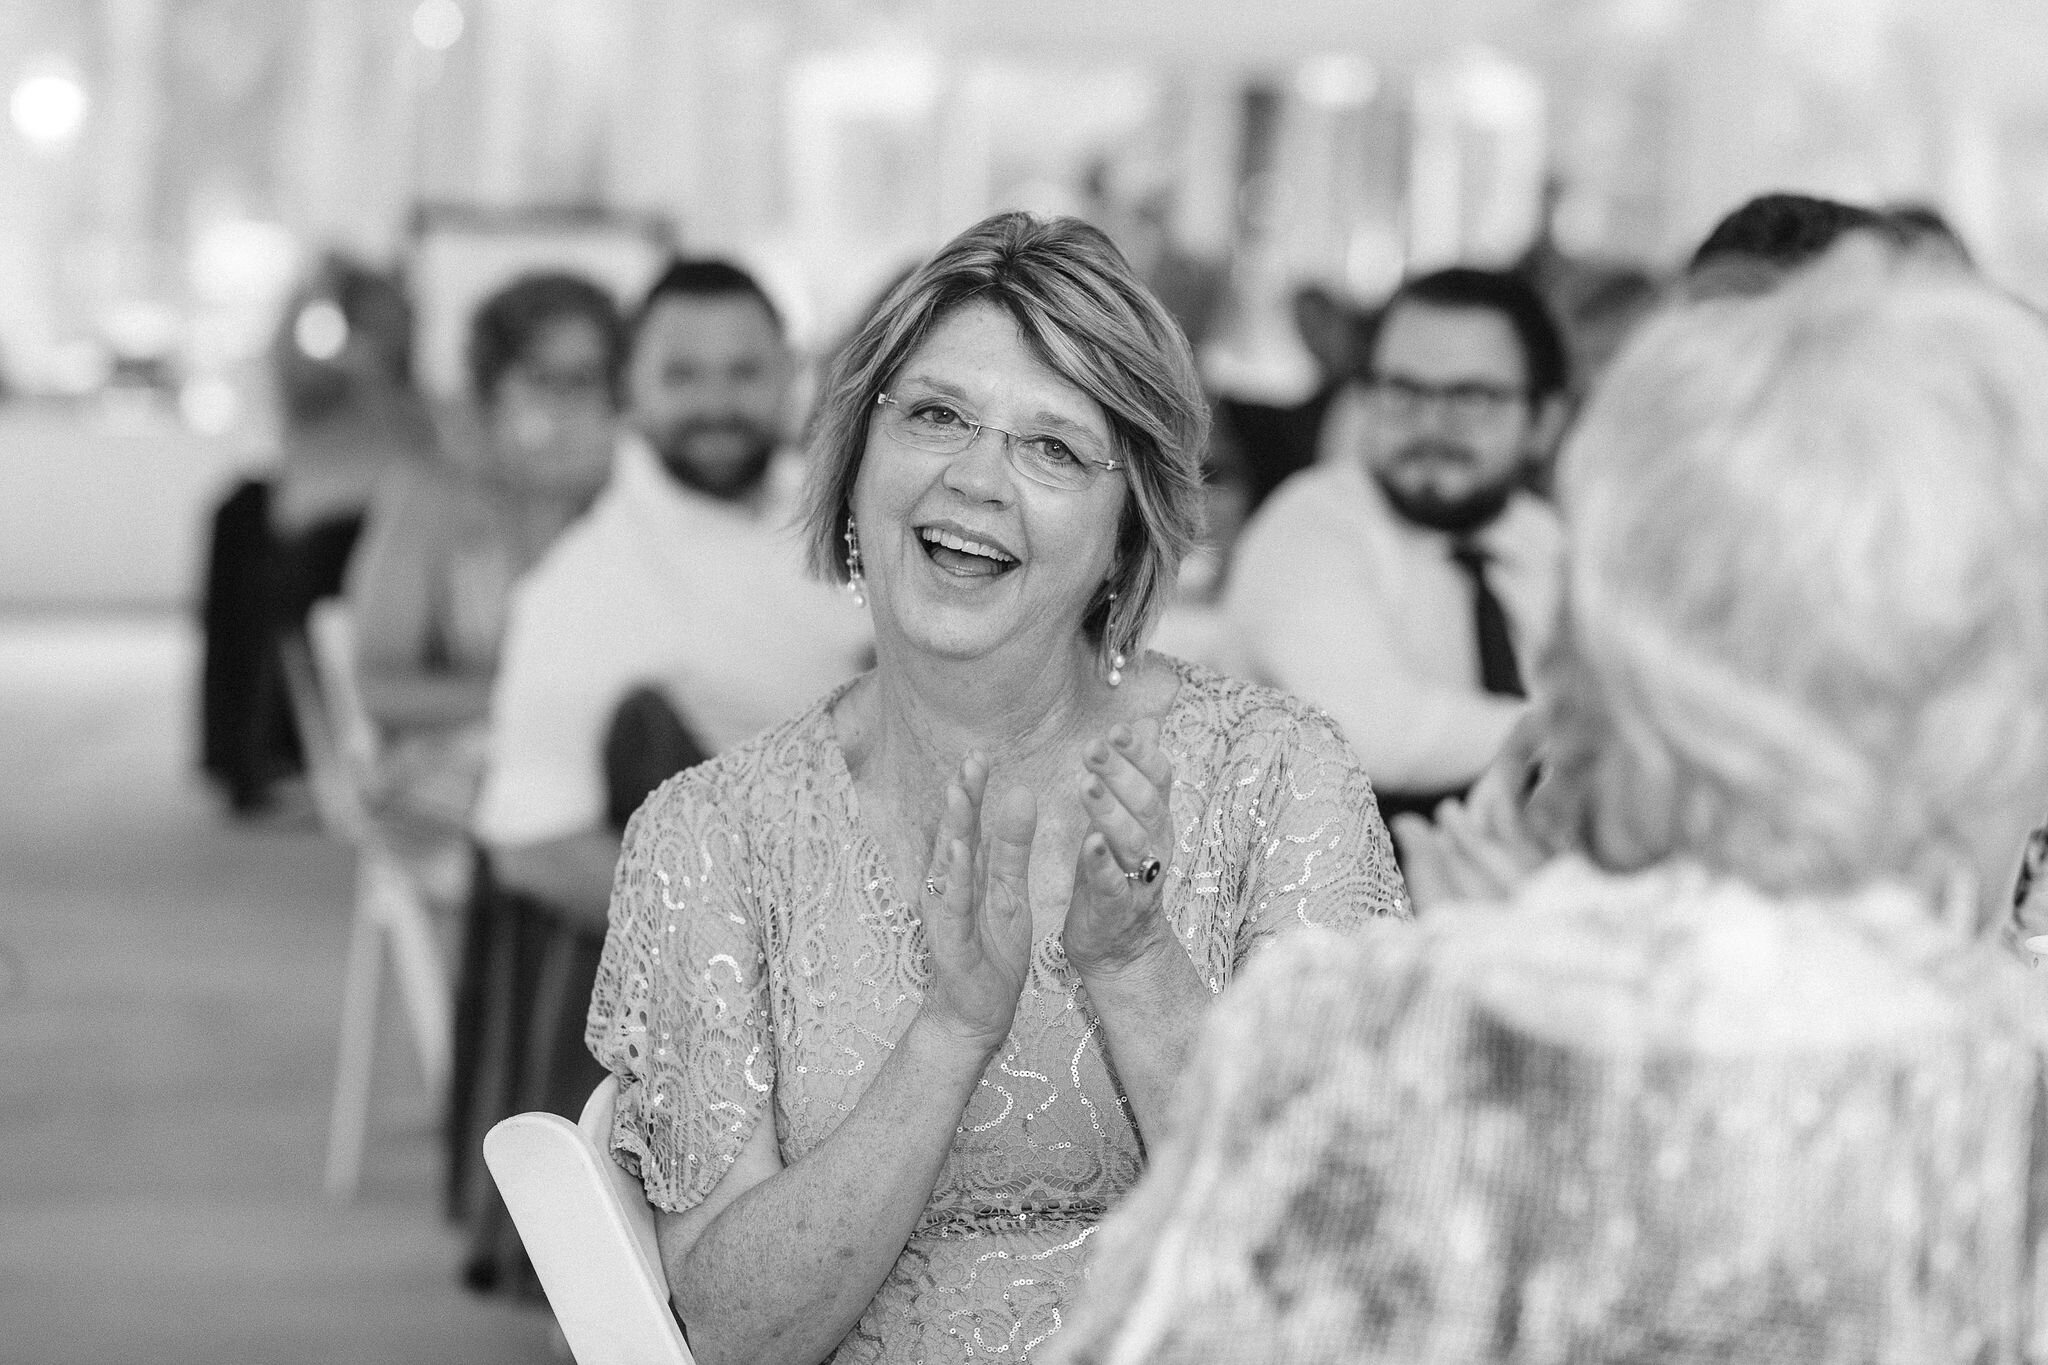 Mother of the groom clapping